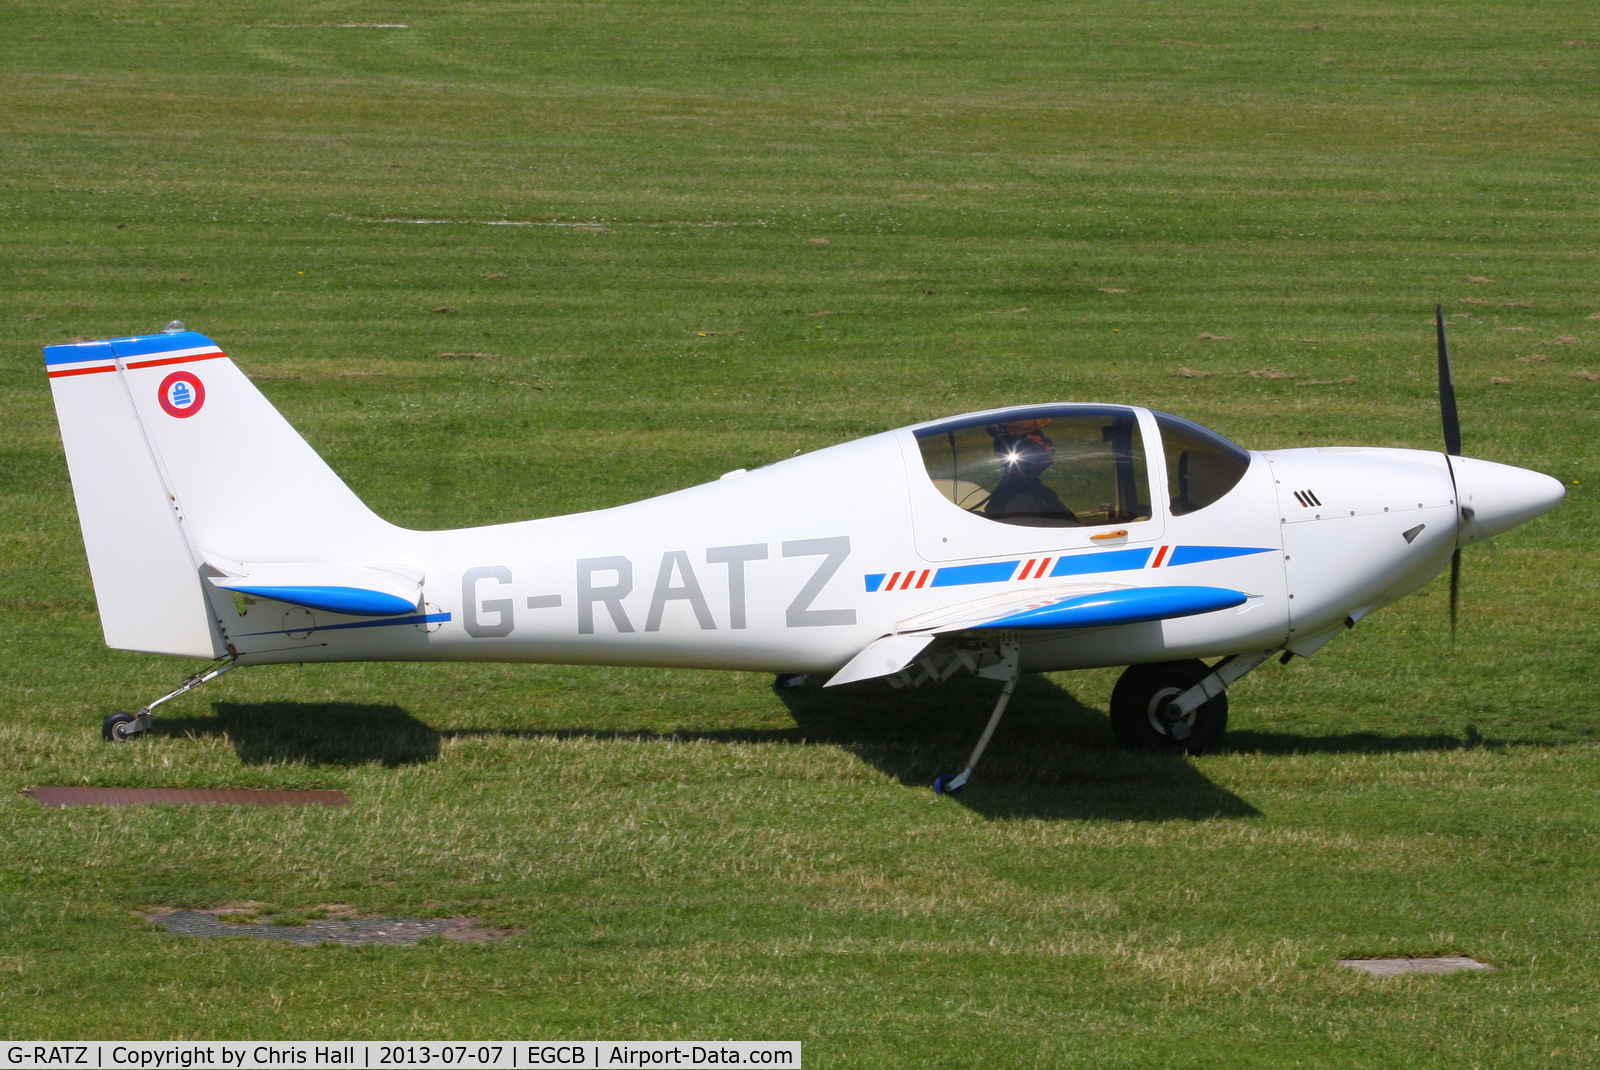 G-RATZ, 1997 Europa Monowheel C/N PFA 247-12582, at the Barton open day and fly in